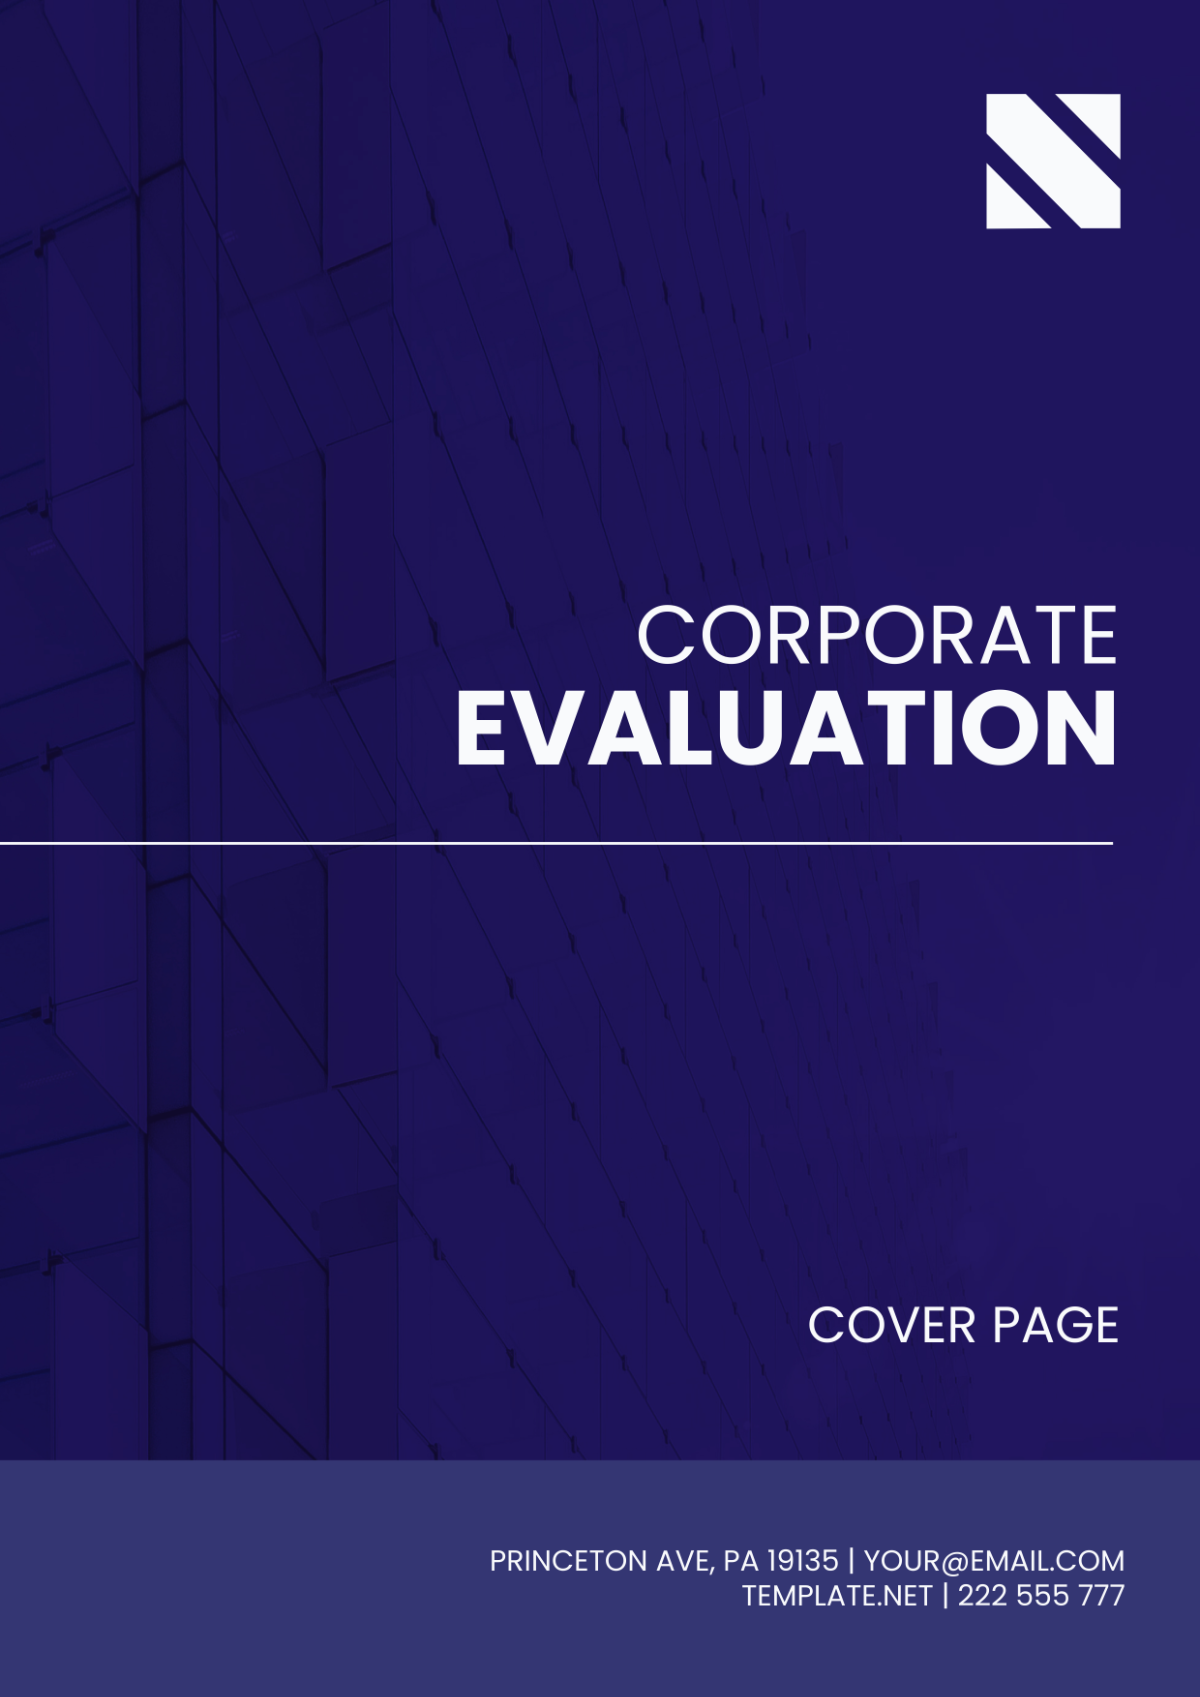 Corporate Evaluation Cover Page Template